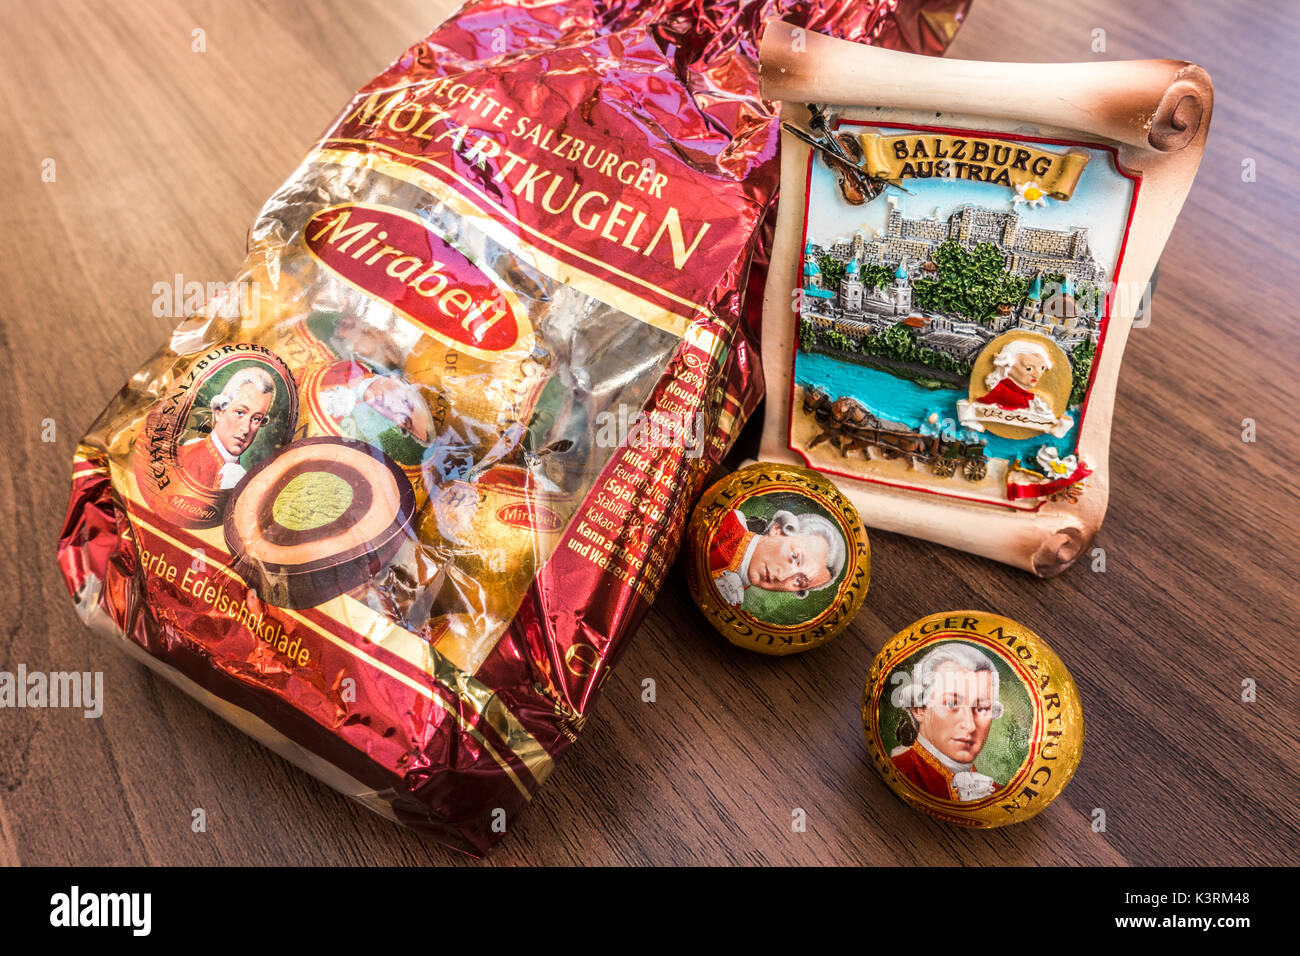 A Salzburg souvenir alongside a pack of Mirabell Mozartkugen Mozart chocolate balls - produced in the spirit of the original recipe in Salzburg. Stock Photo